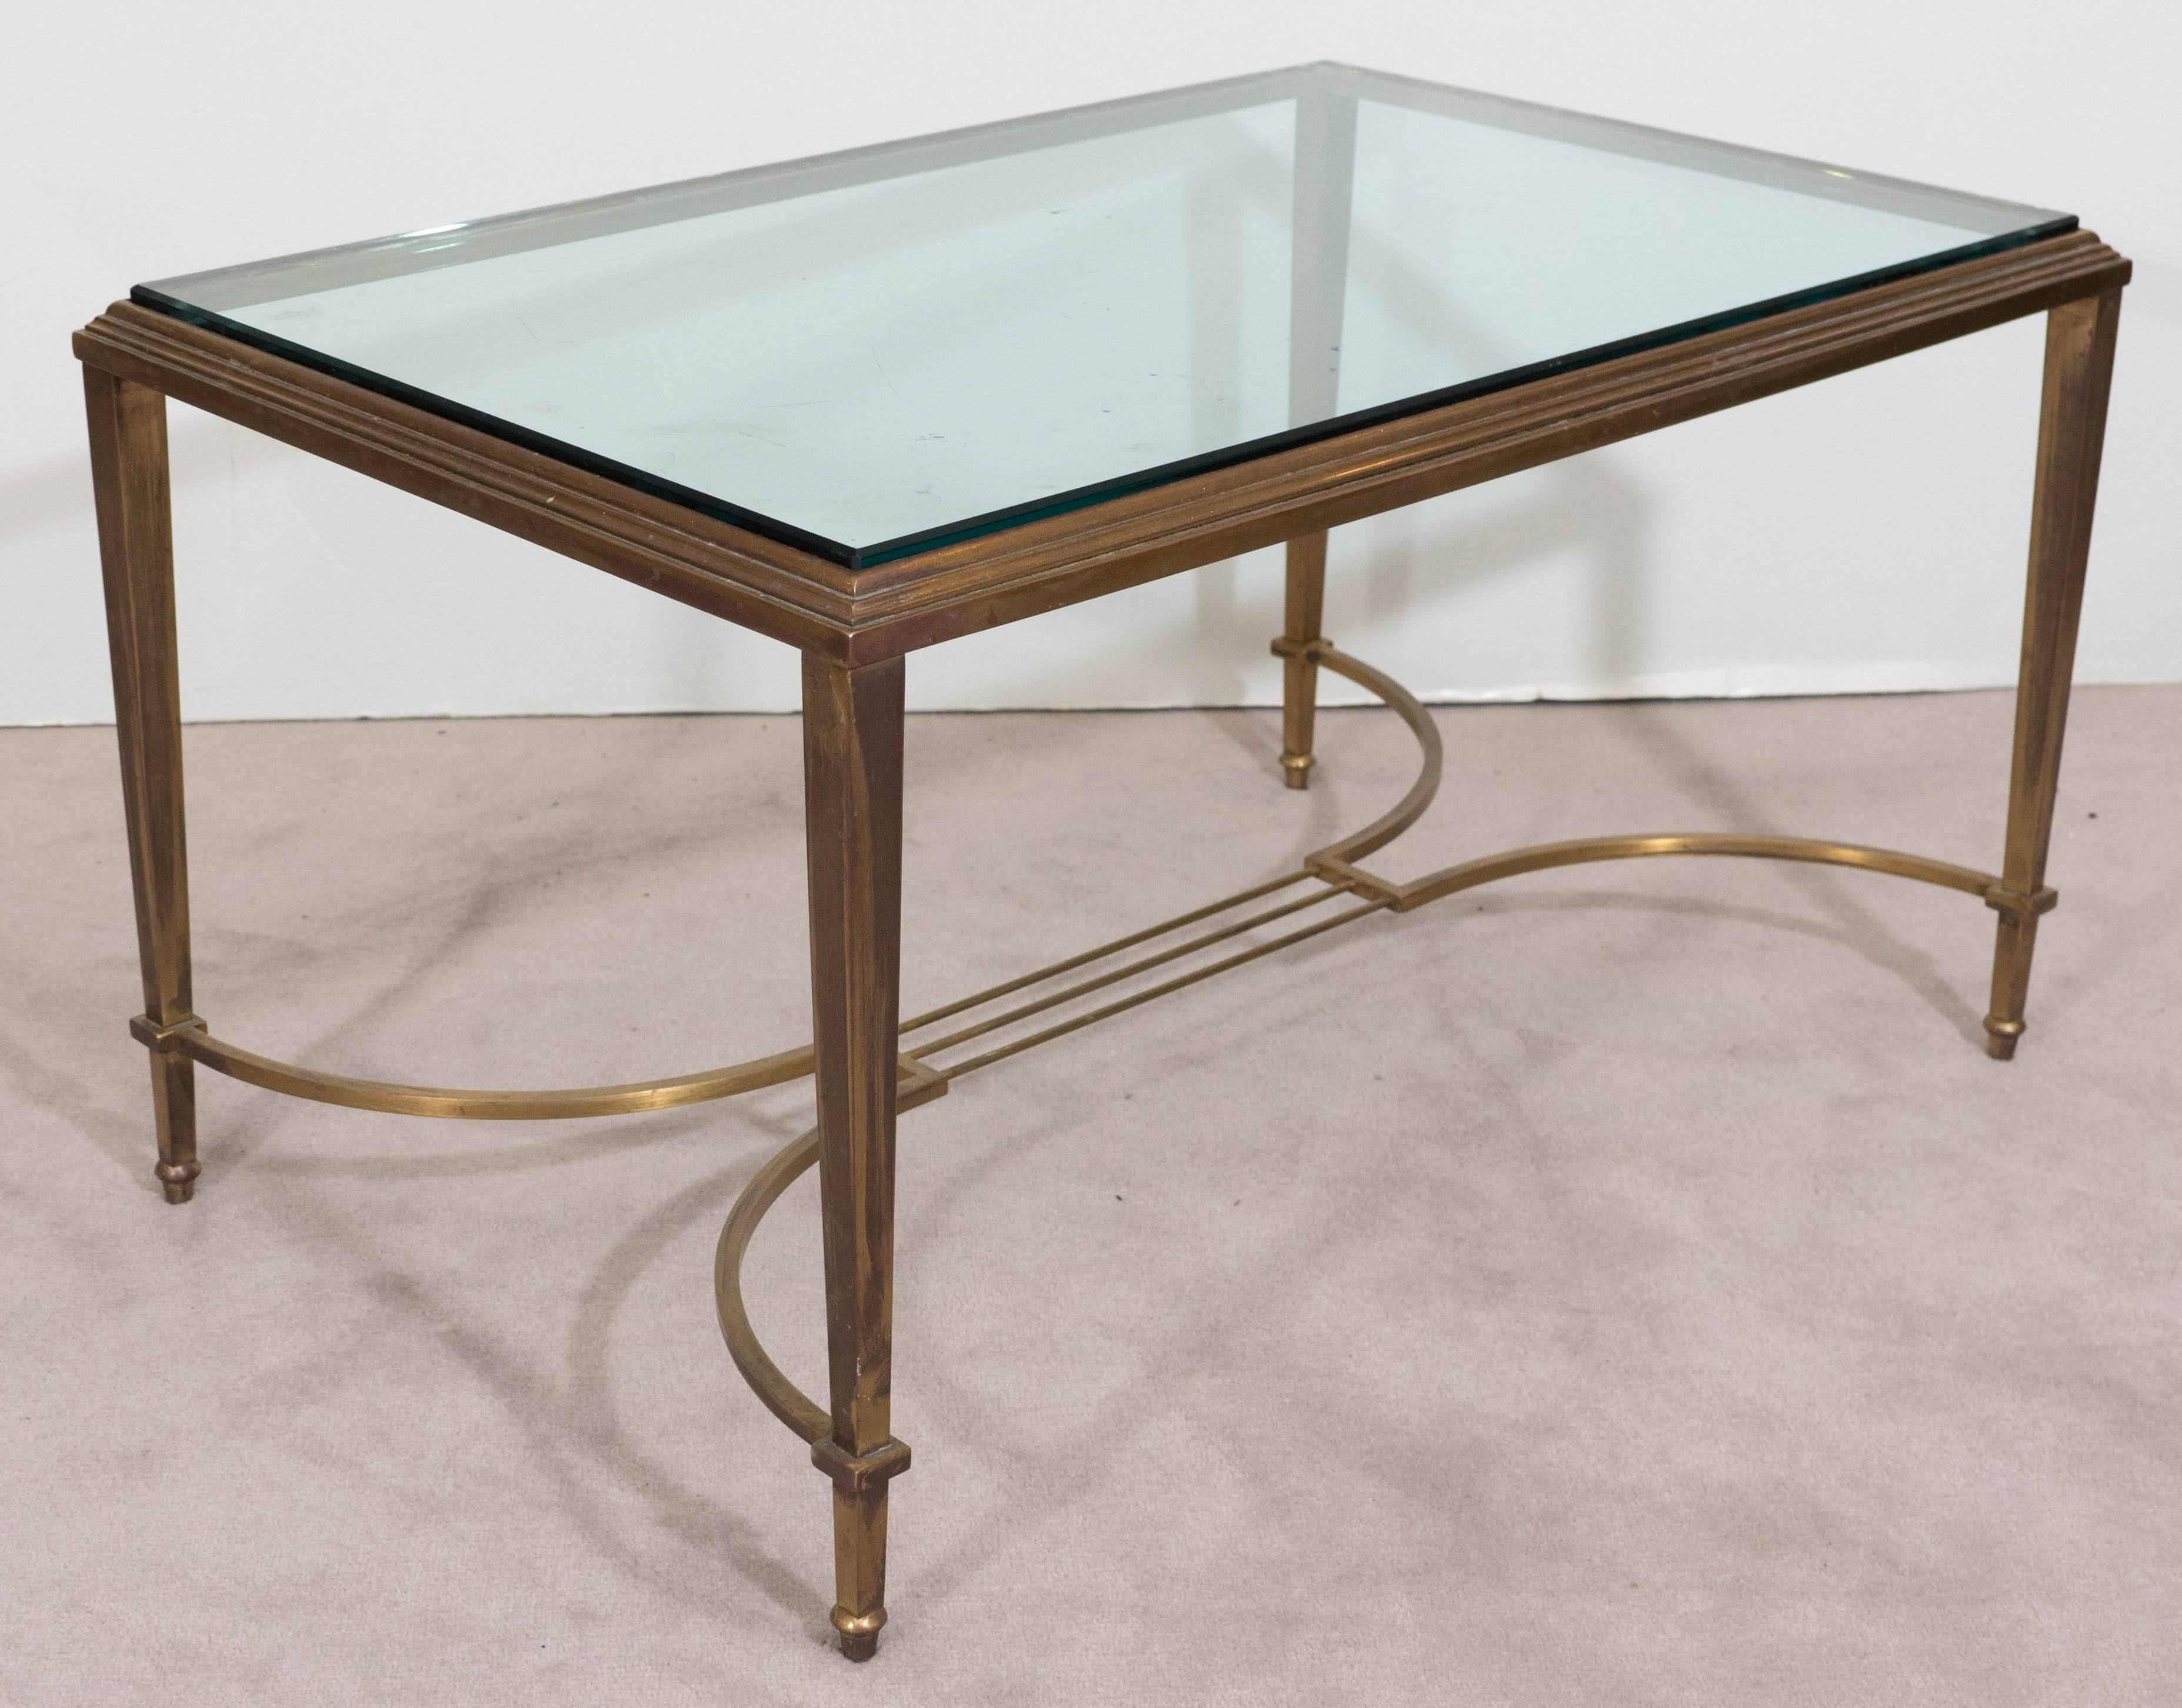 Mid-20th Century Neoclassical Style Glass Top Coffee Table in Brass, Attributed to Maison Jansen